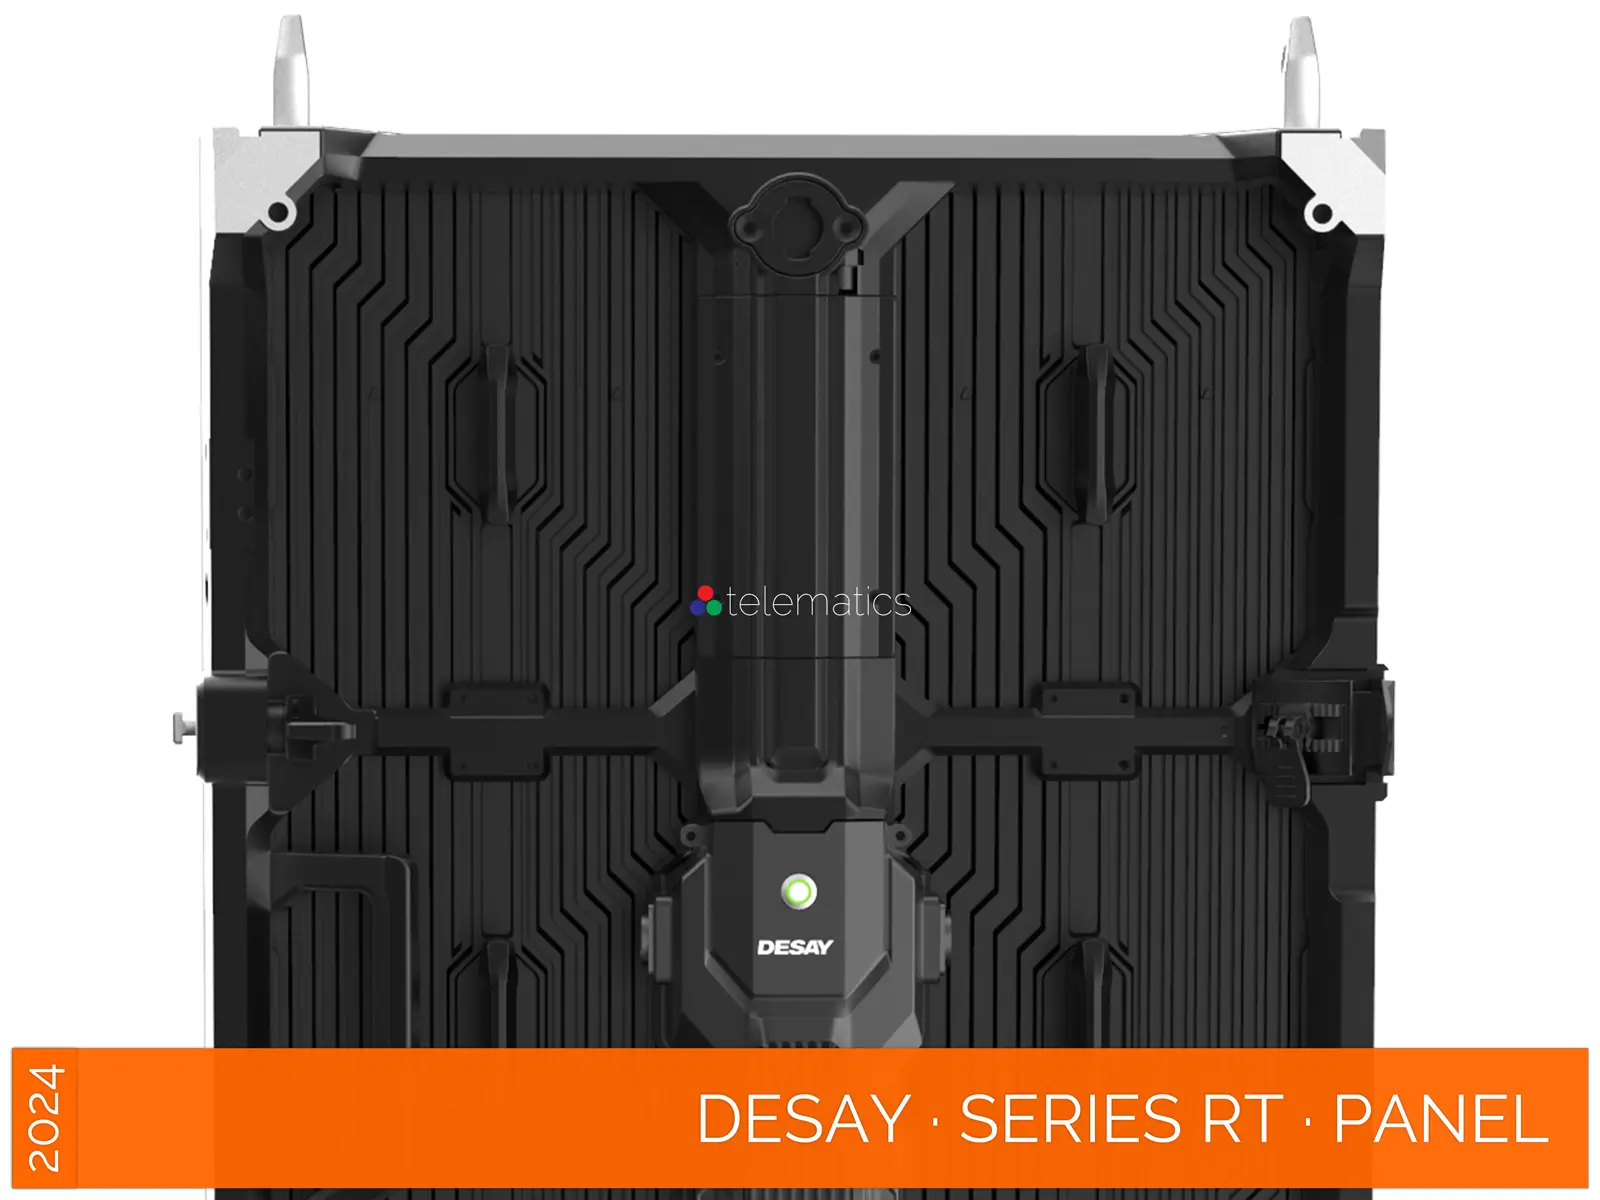 Desay · Series RT · Direct View LED Display Panel · Full Pixel Range · Rental Or Touring · Outdoor Rated · Rapid Service And Setup · Robust Panels For Rugged Use · NovaStar COEX MX CX · Vision Management Platform · Viplex · review · price · cost · priced from $1,790 per square meter